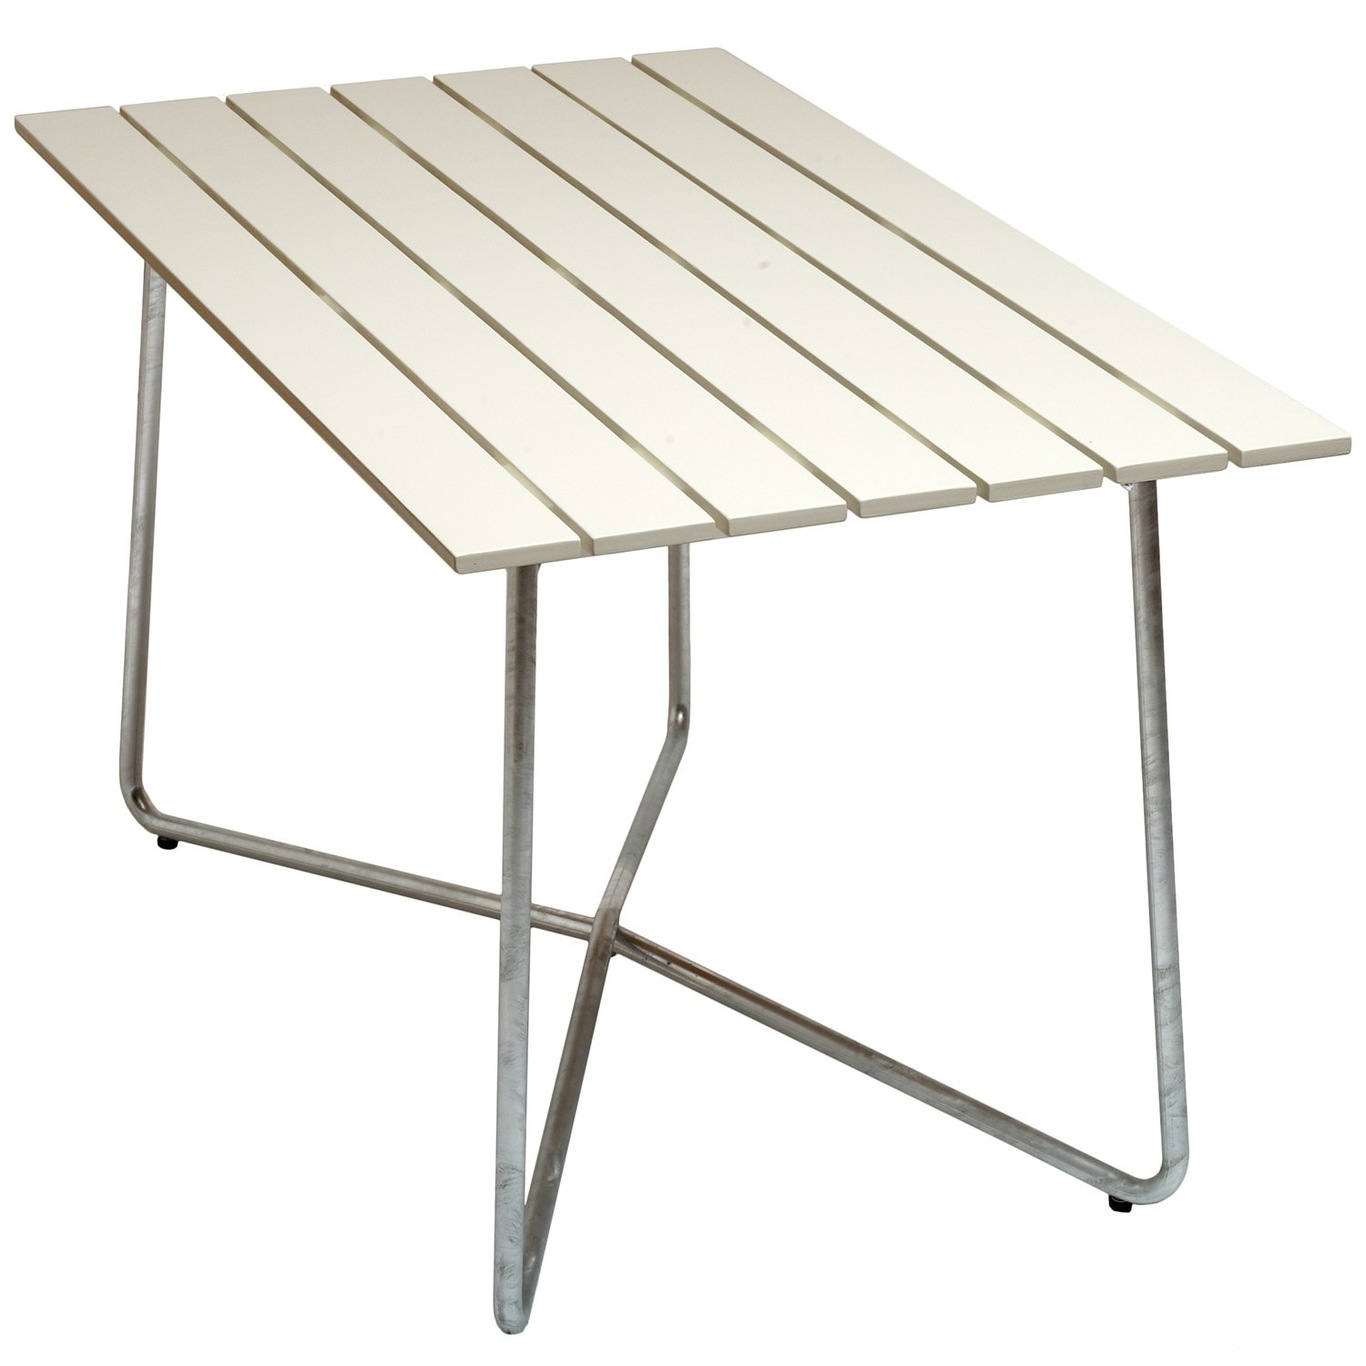 B25A Table 70x120 cm, White Lacquered Oak / Hot Galvanized Steel